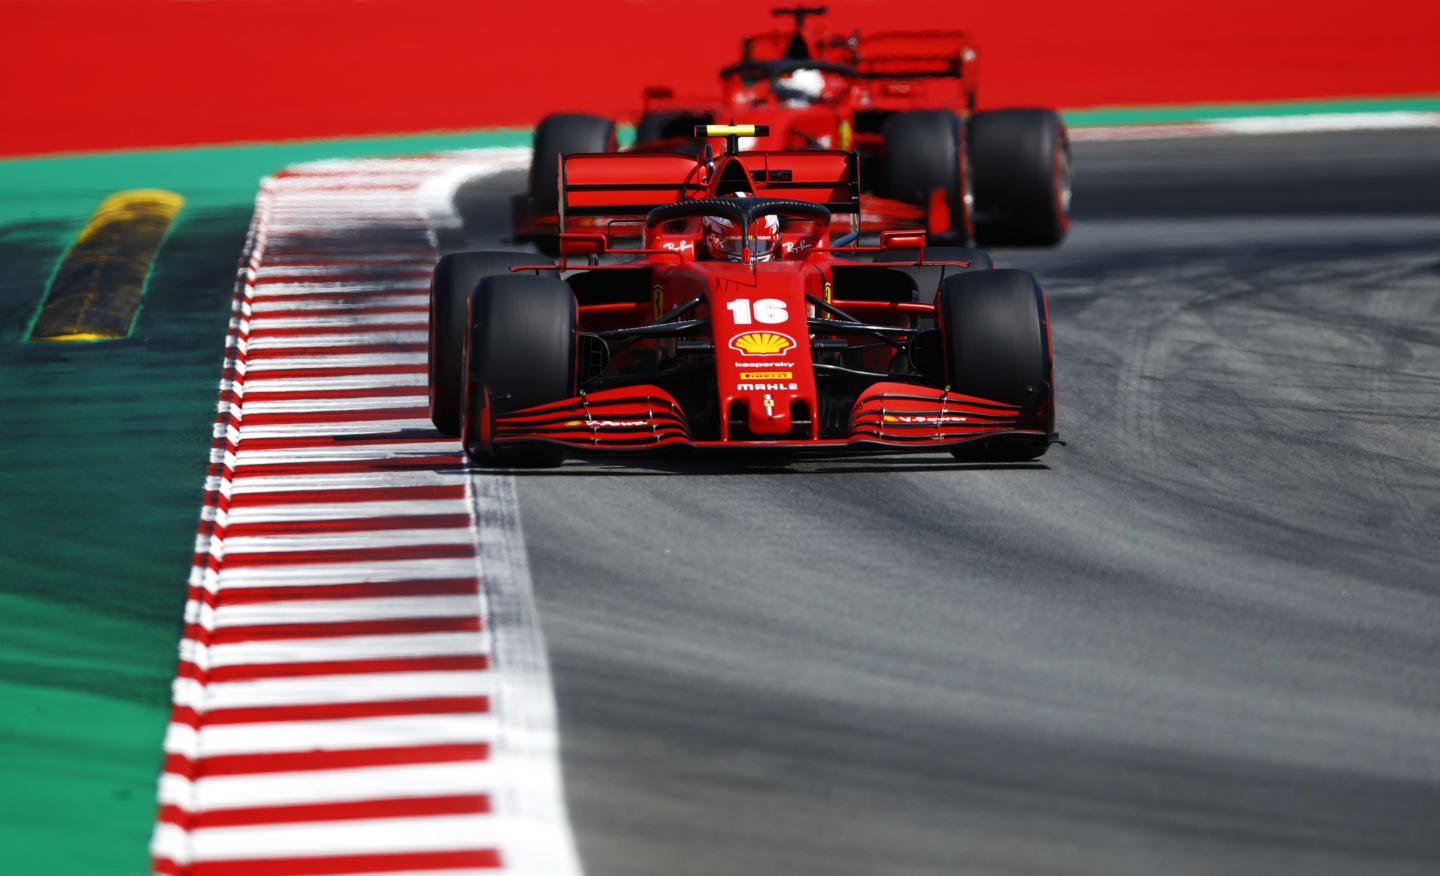 BARCELONA, SPAIN - AUGUST 15: Charles Leclerc of Monaco driving the (16) Scuderia Ferrari SF1000 on track during qualifying for the F1 Grand Prix of Spain at Circuit de Barcelona-Catalunya on August 15, 2020 in Barcelona, Spain. (Photo by Alejandro Garcia/Pool via Getty Images)